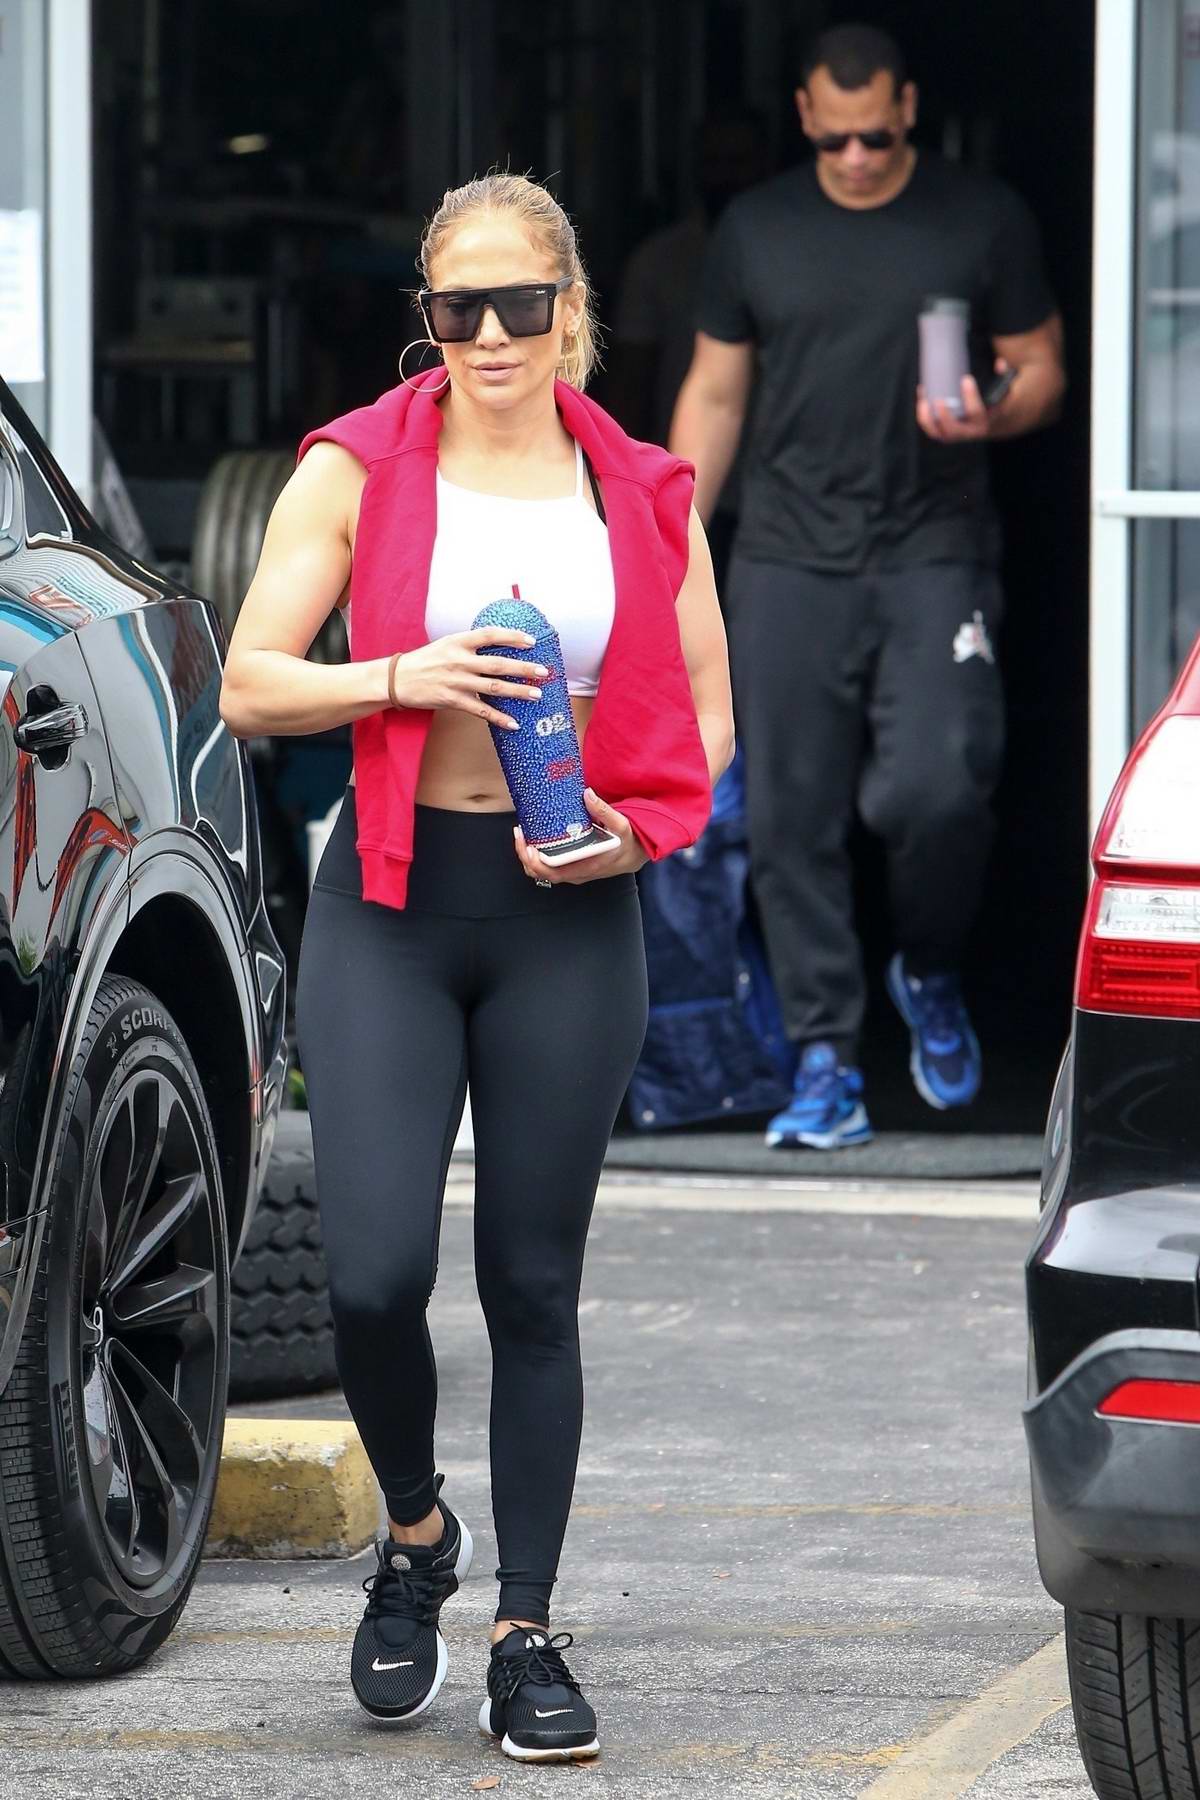 Jennifer Lopez Shows Off Her Fit Physique In A White Crop Top And Black Leggings As She Leaves